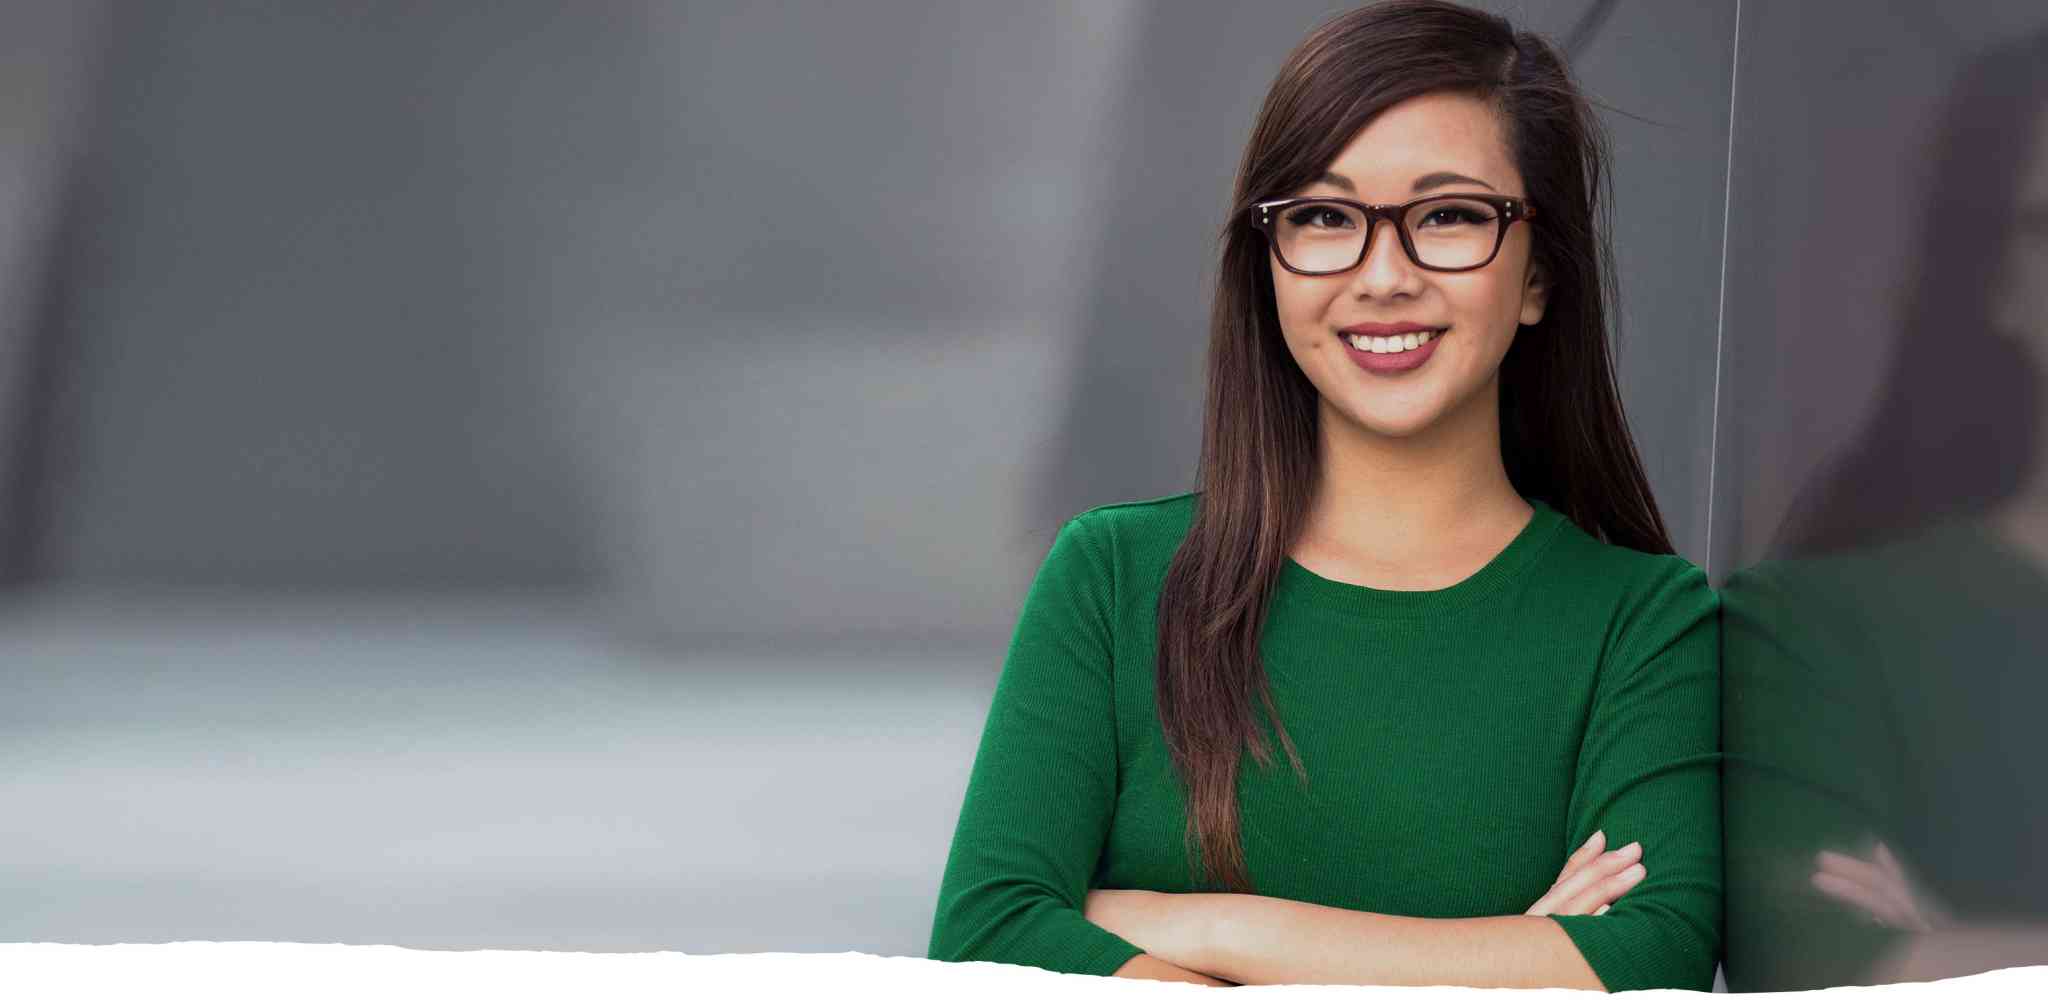 Woman in green shirt wearing glasses and crossing arms across body.